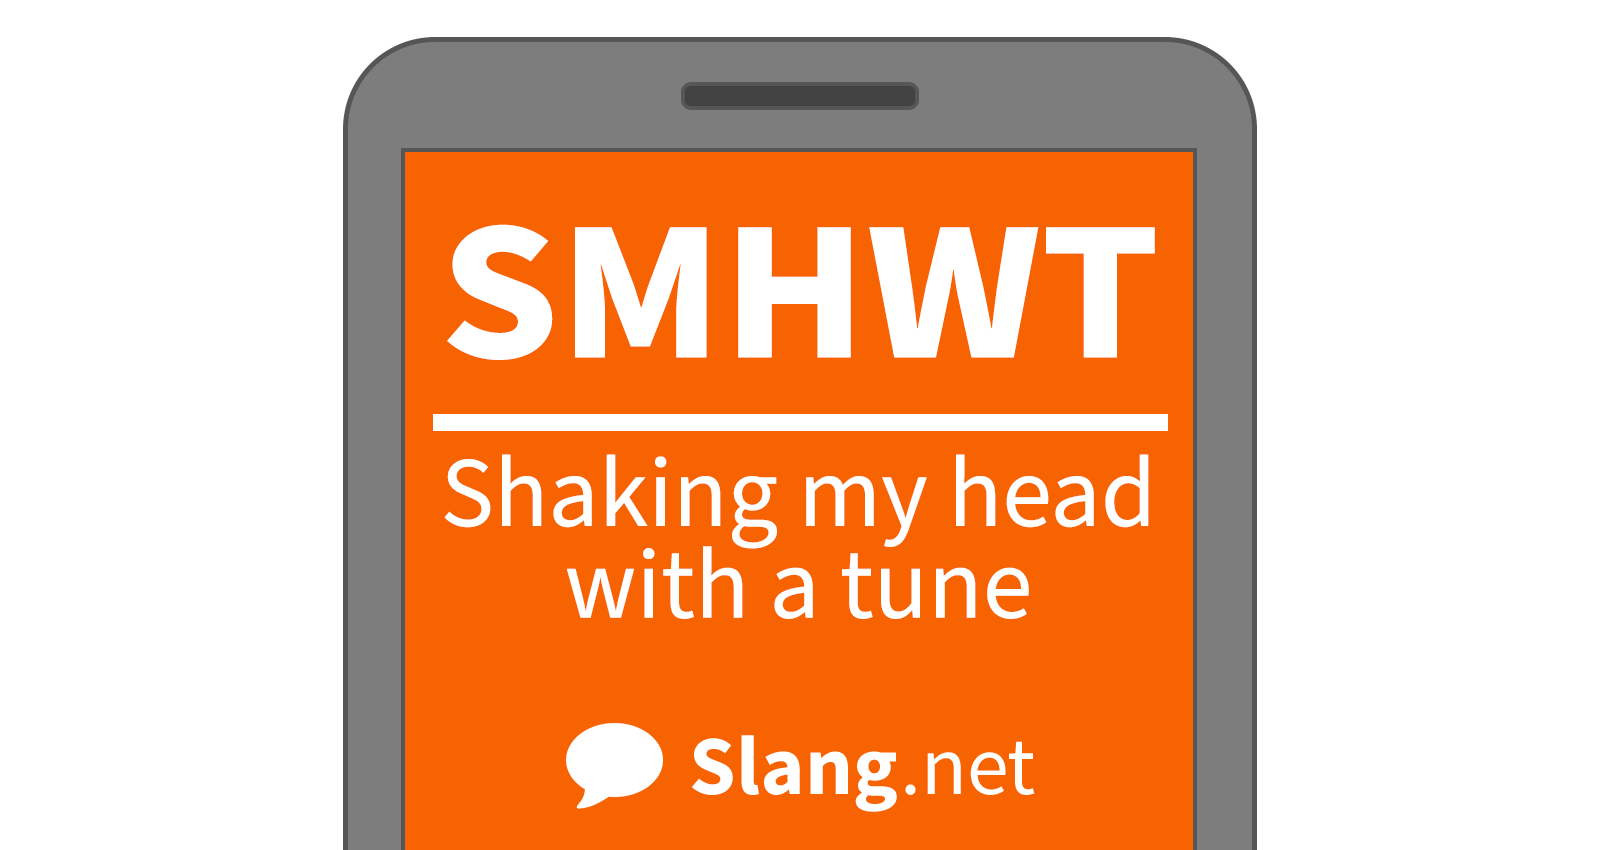 SMHWT stands for &quot;shaking my head with a tune&quot;